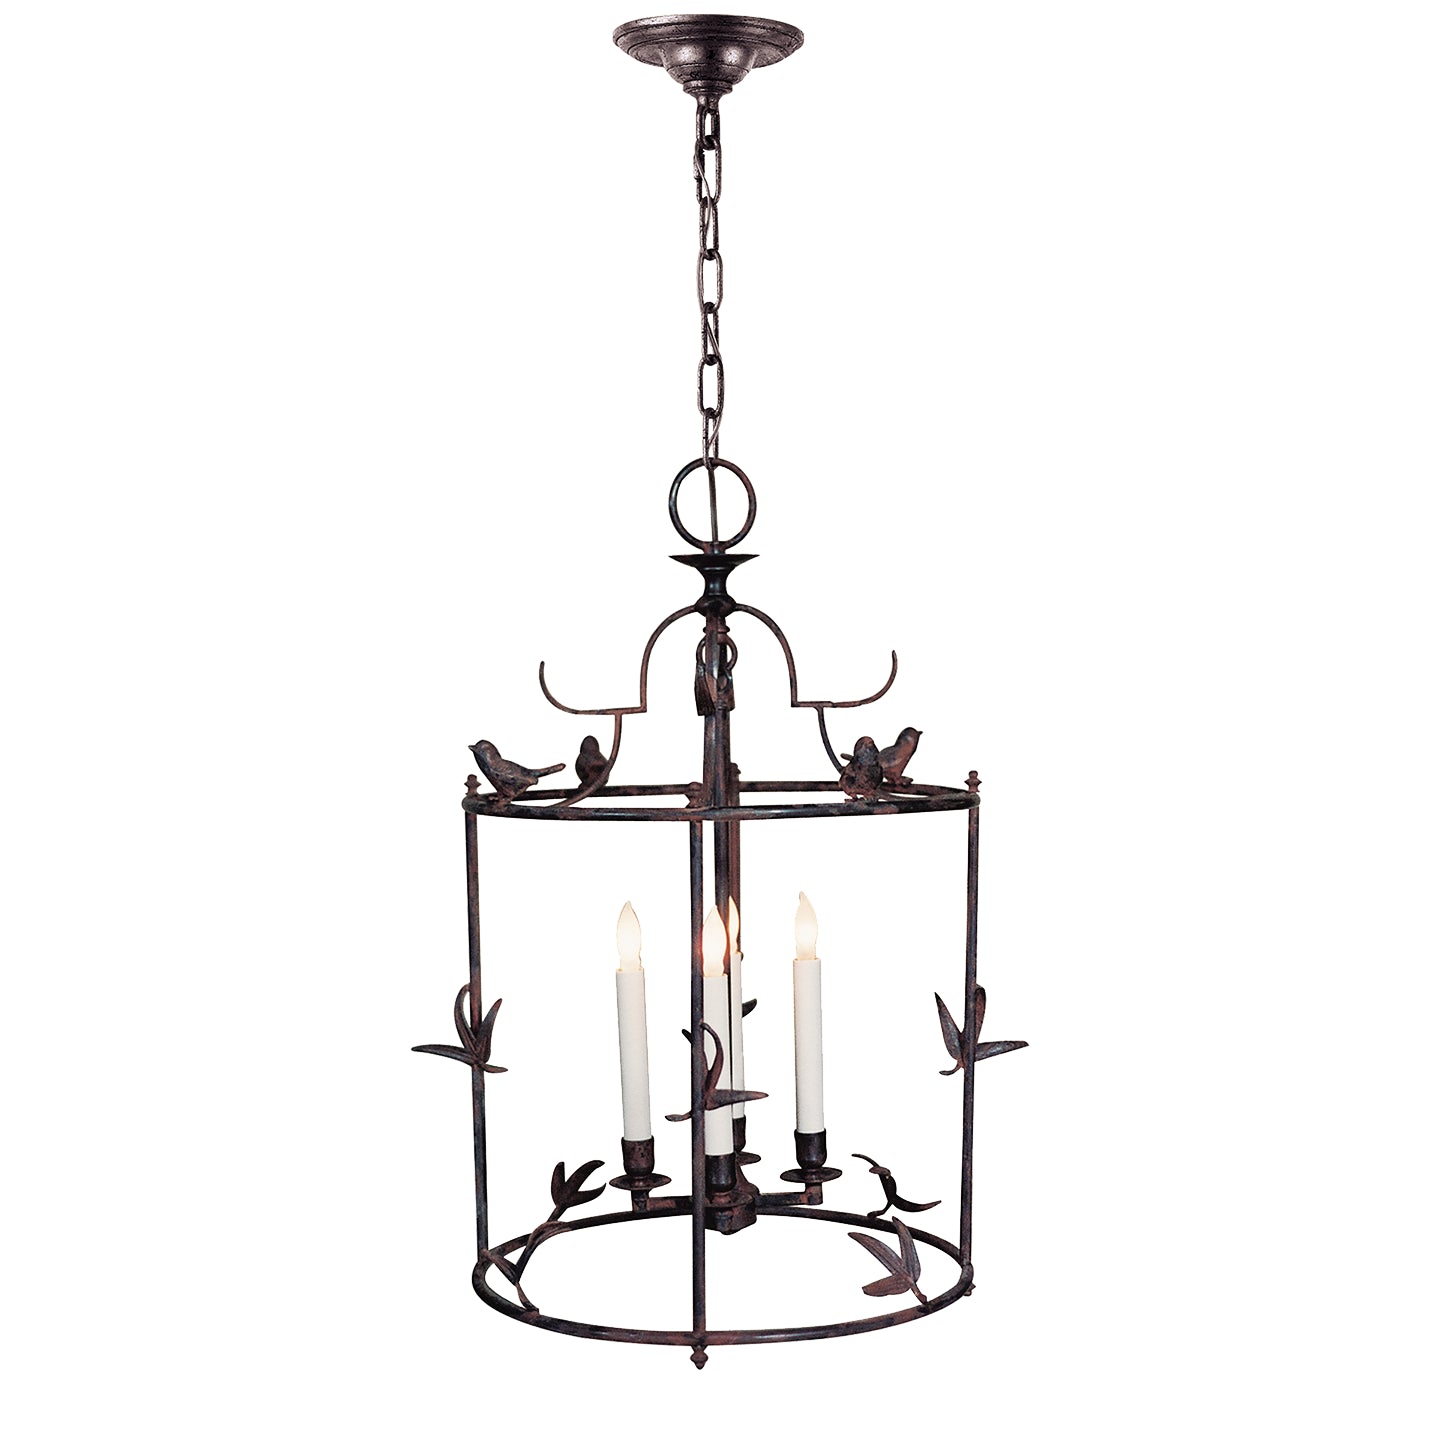 Load image into Gallery viewer, Visual Comfort Signature - CHC 3108R - Four Light Lantern - Diego - Hand Painted Rust Finish
